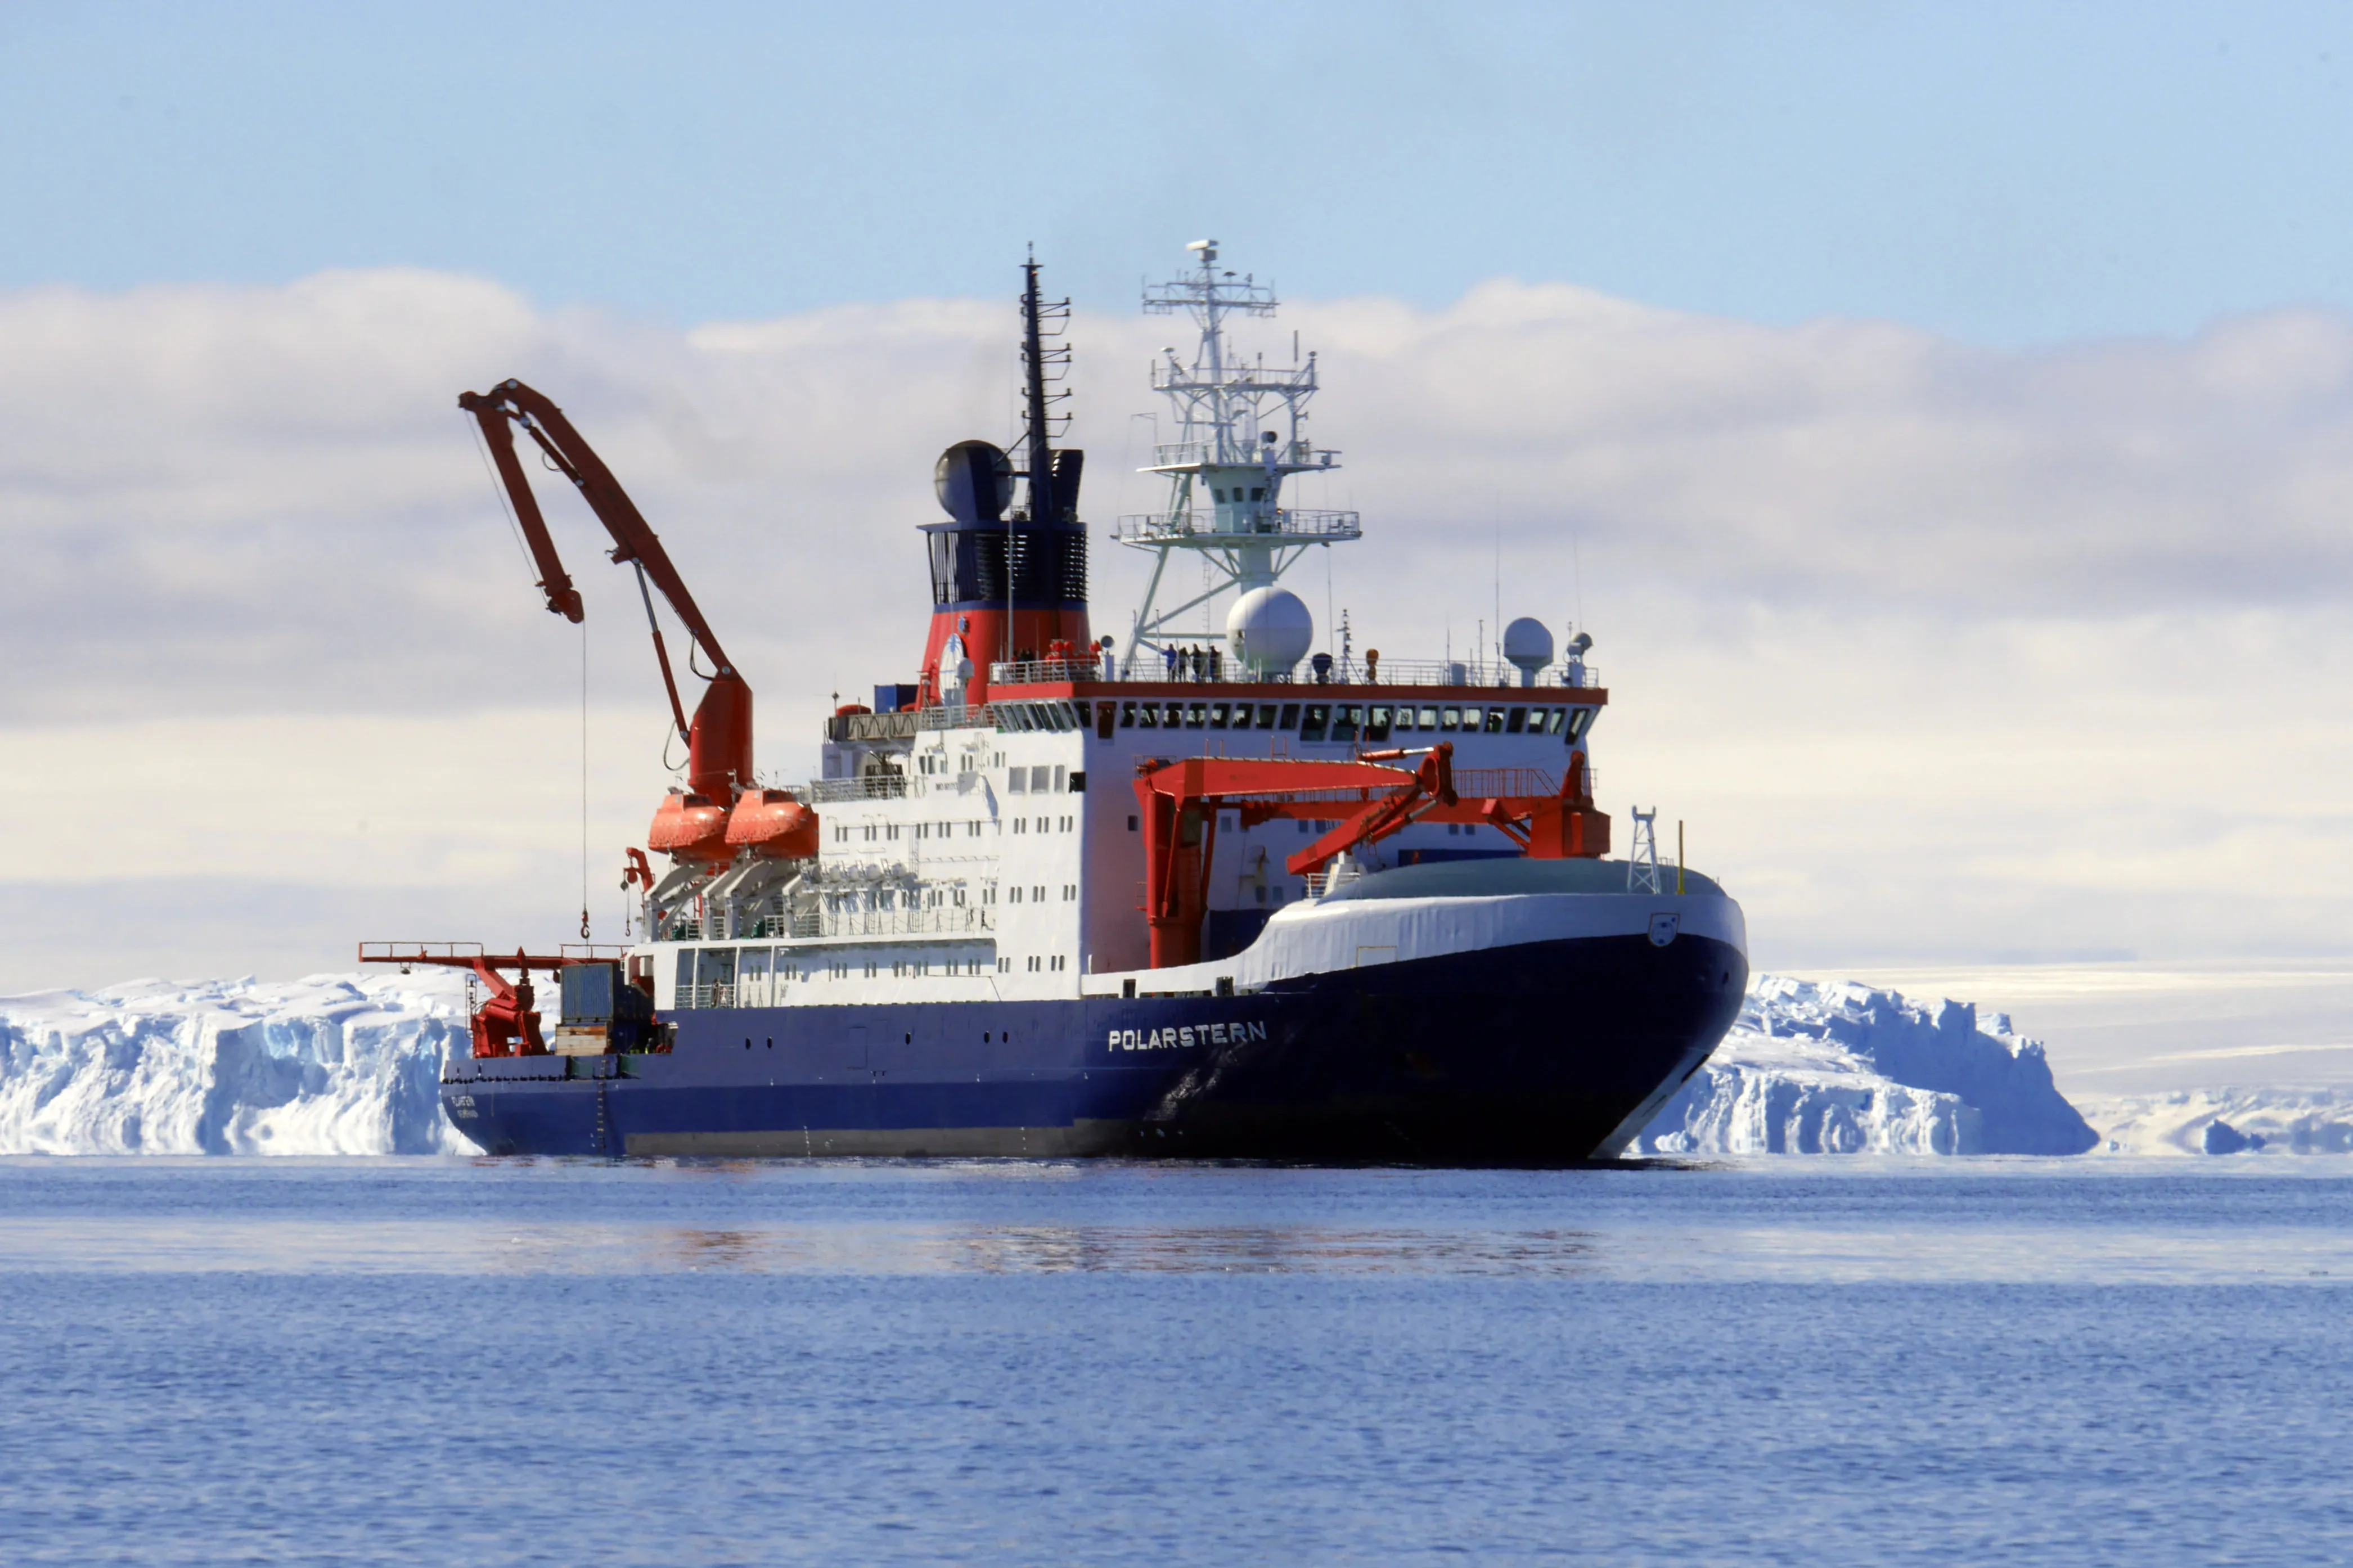 Polarstern, a blue and white icebreaker, at rest against a background of ice.